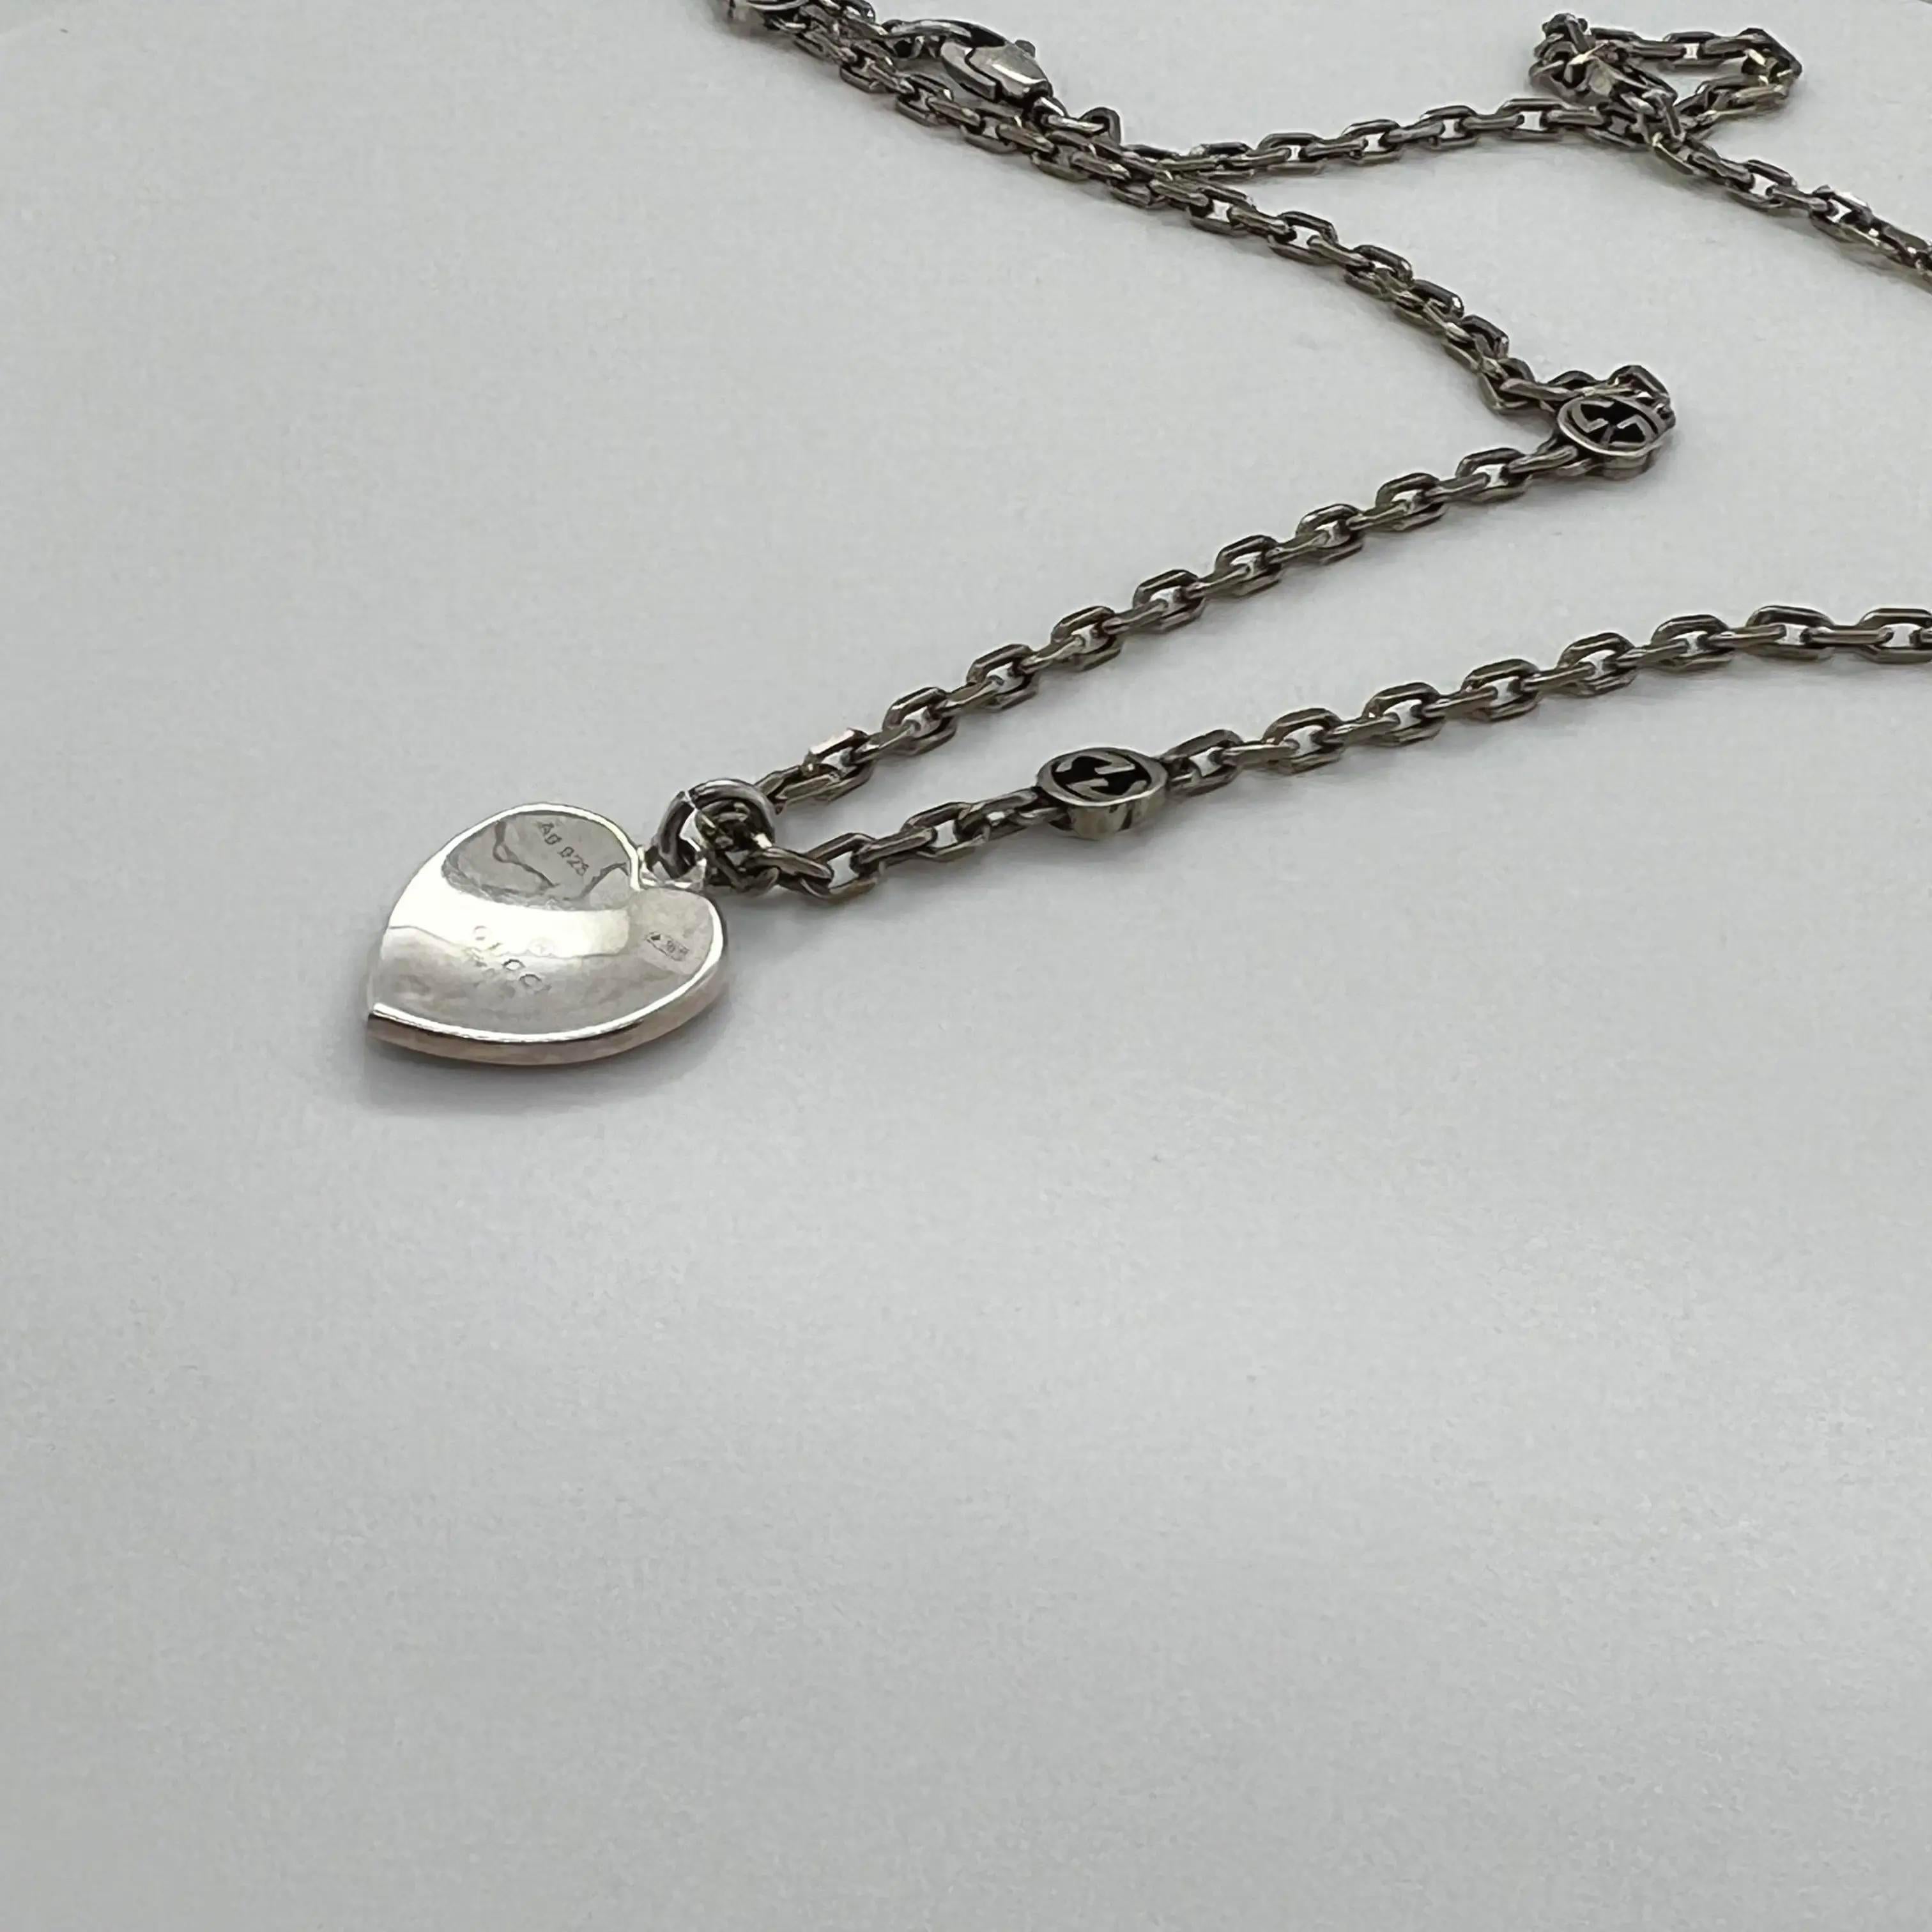 gucci heart necklace